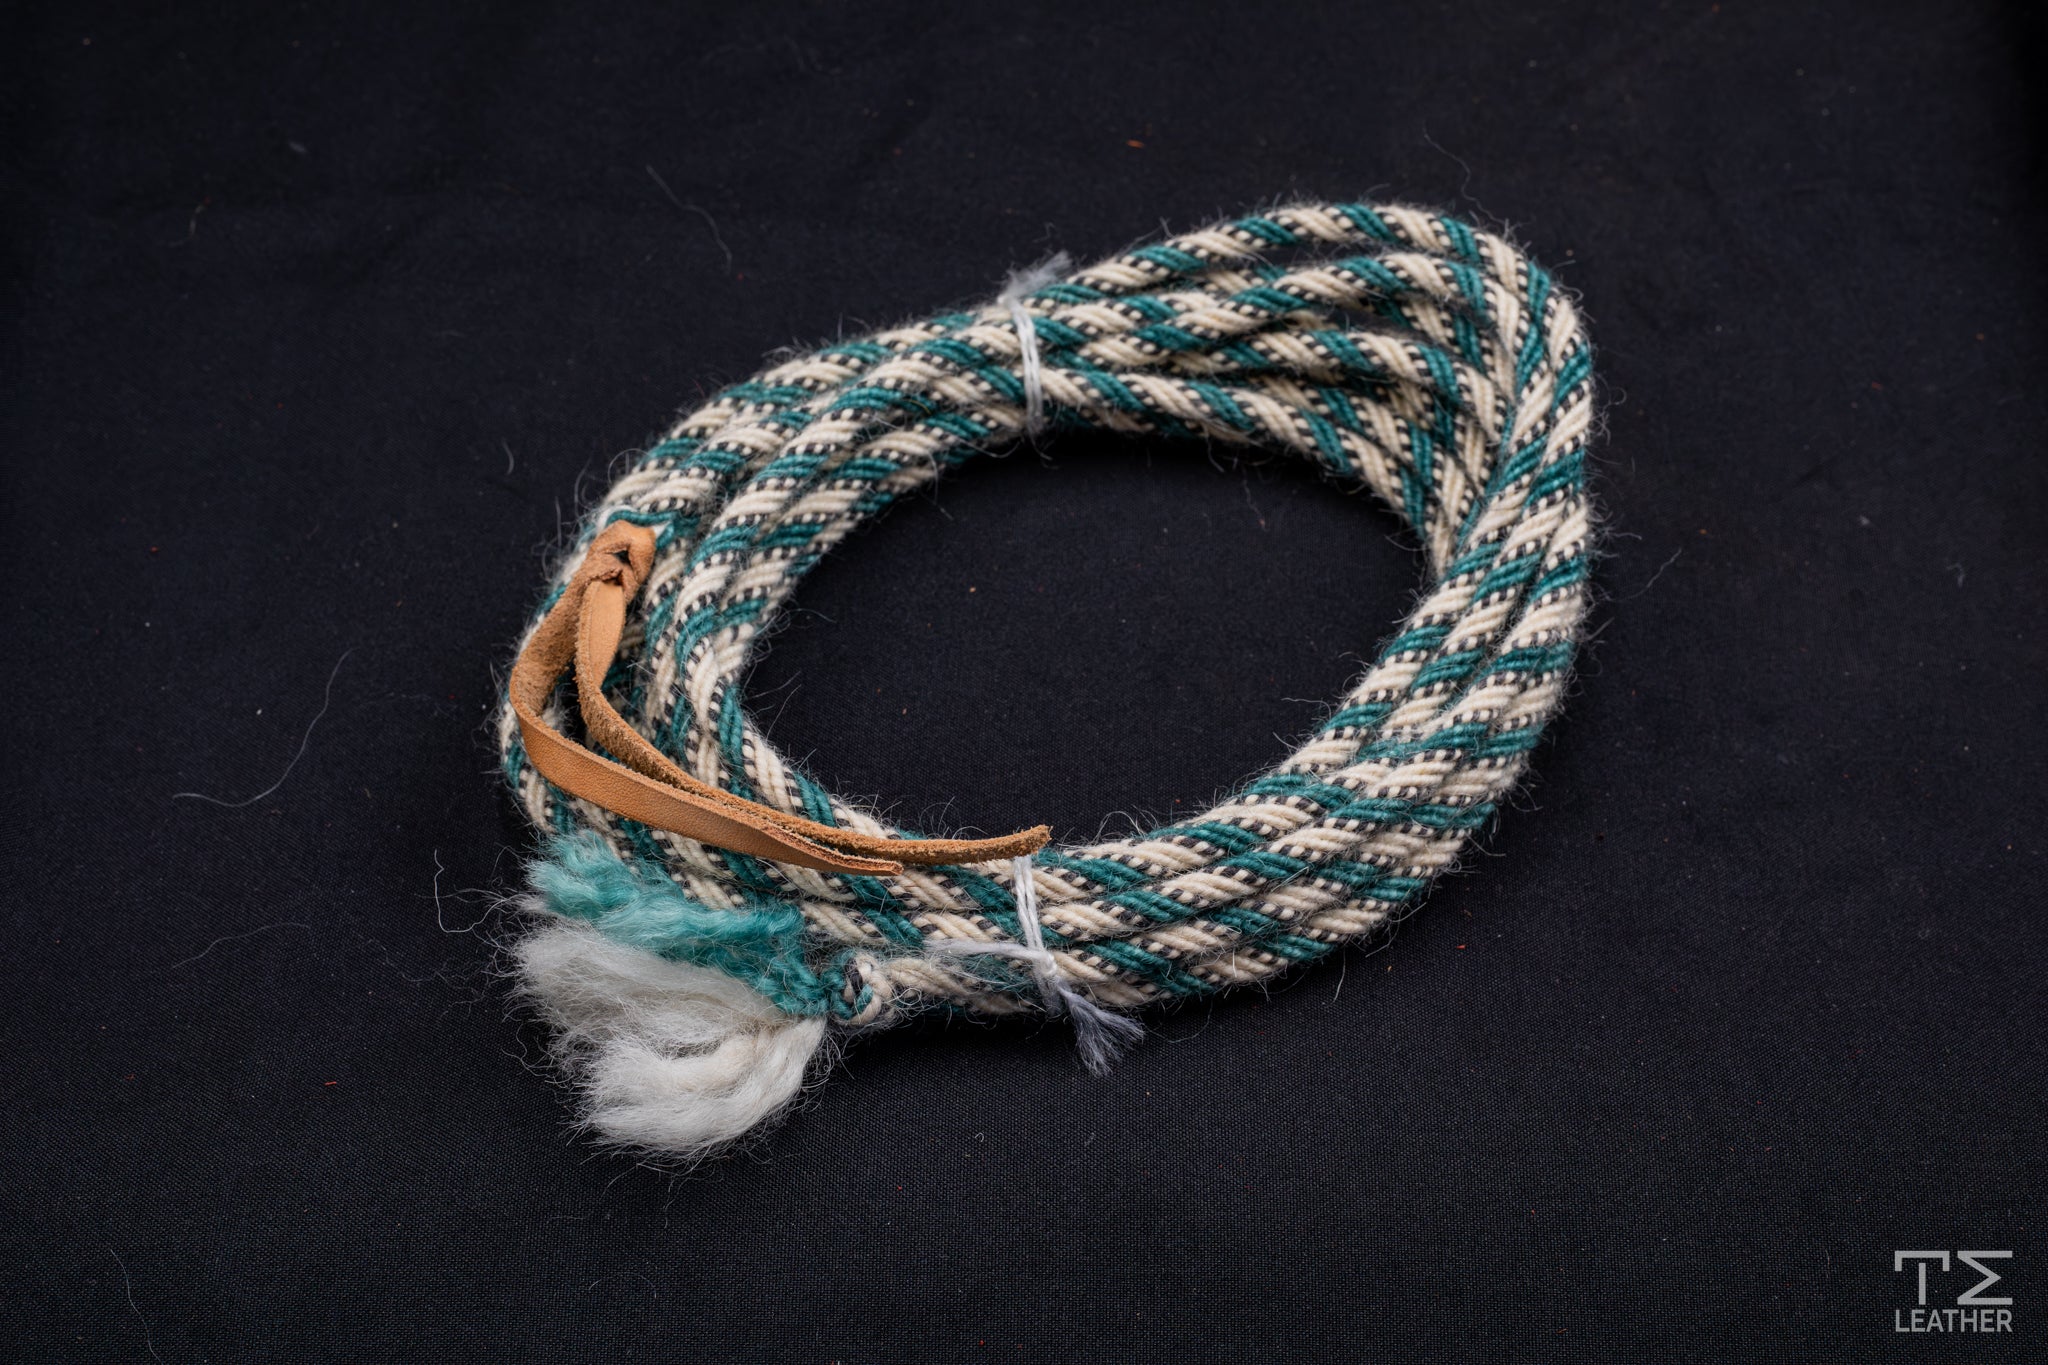 1/4" Teal, White & Grey Mohair Mecate